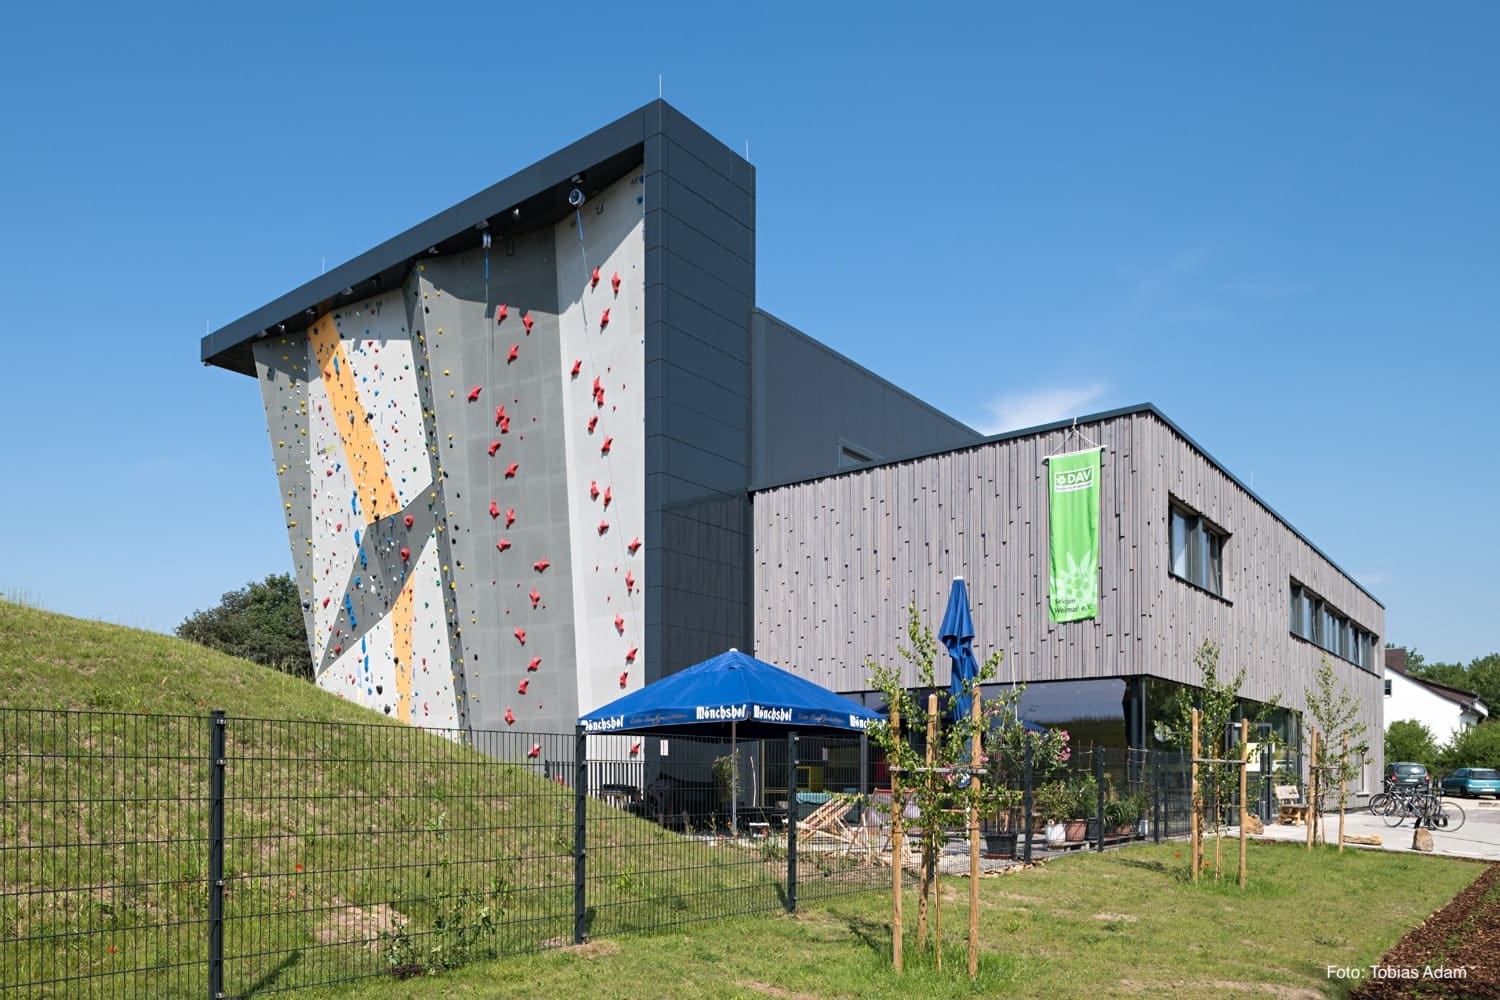 A building with a large rock wall on the side of it.